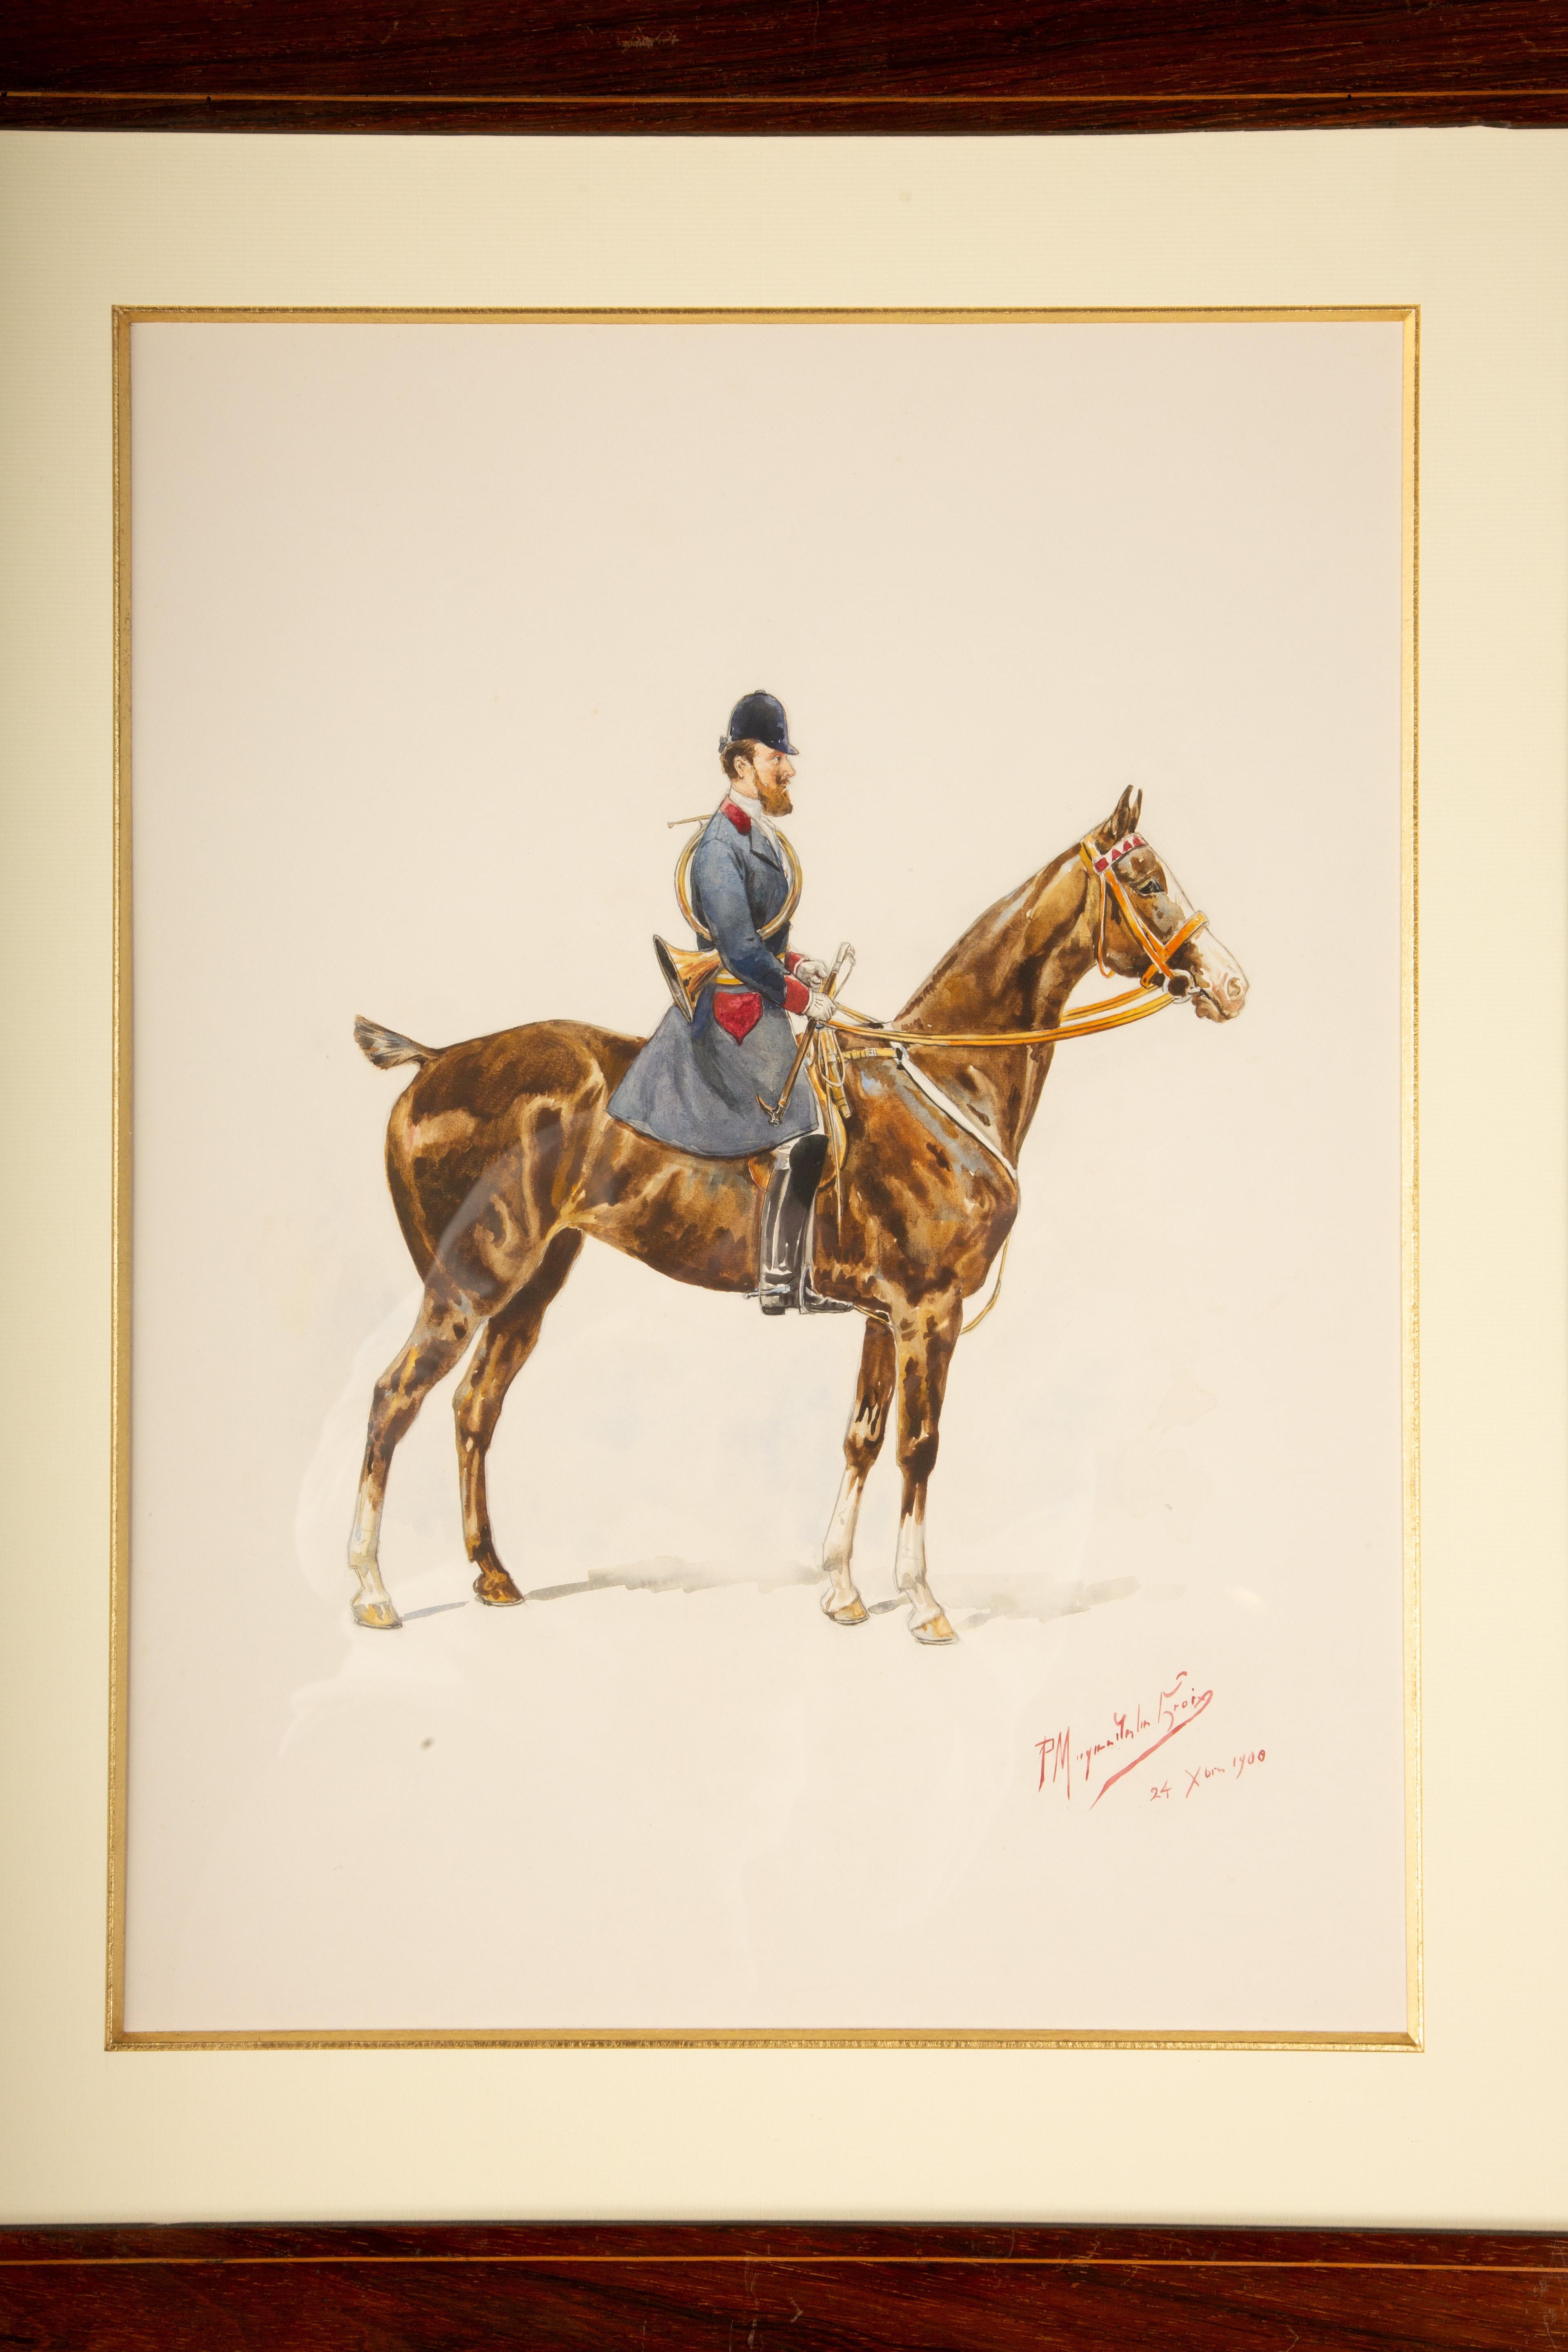 Timeless Equestrian Elegance: Paul Magne De La Croix's 1900 Watercolor  In Excellent Condition For Sale In New York, NY